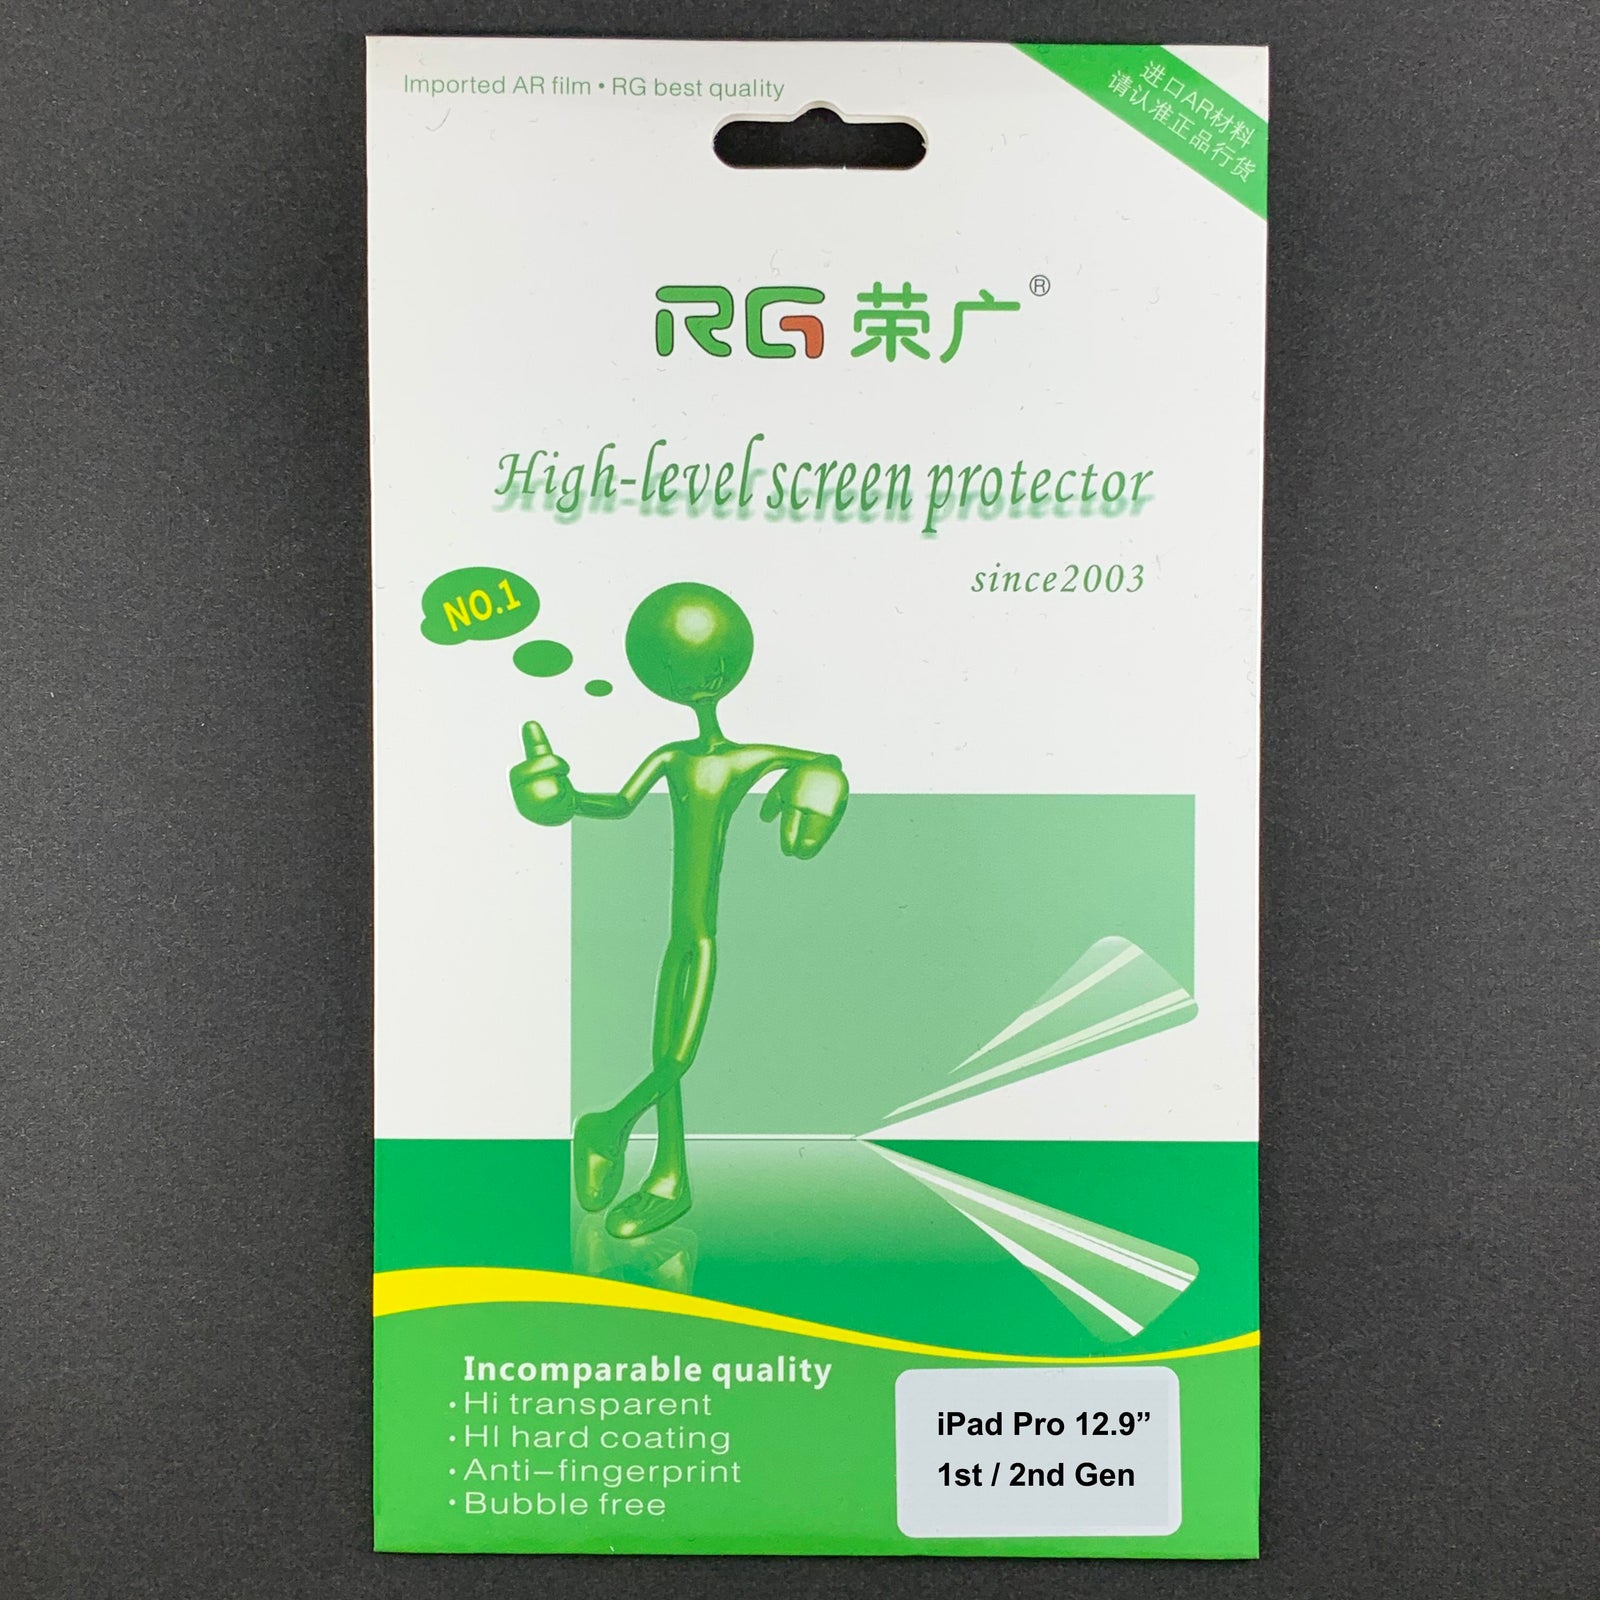 RG Professional Soft Film Screen Protector for iPad Pro 12.9" 1st / 2nd Gen (CLEAR, 2-PACK)